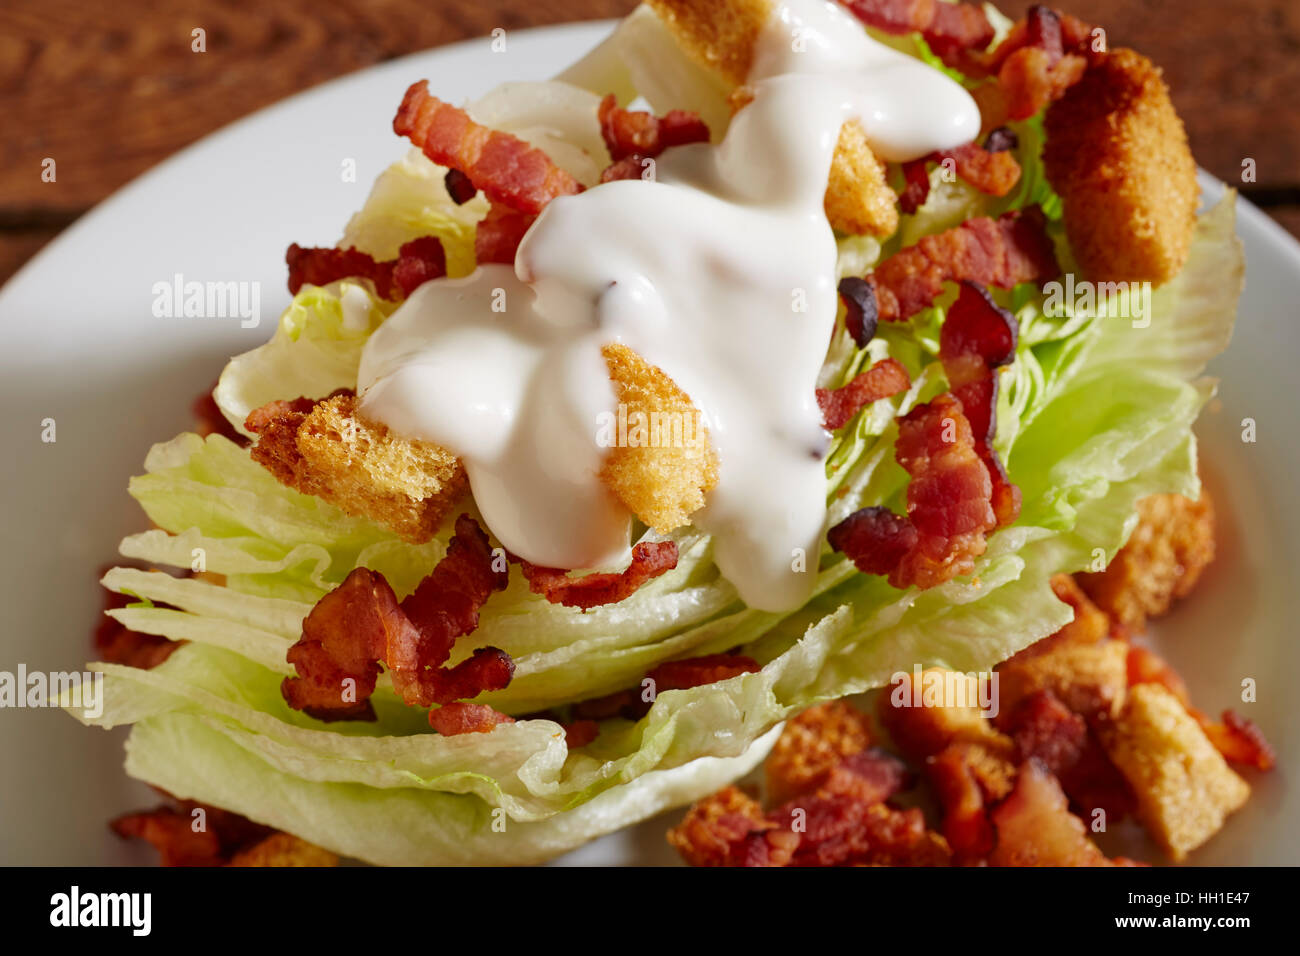 A classic wedge salad with ranch dressing. Stock Photo